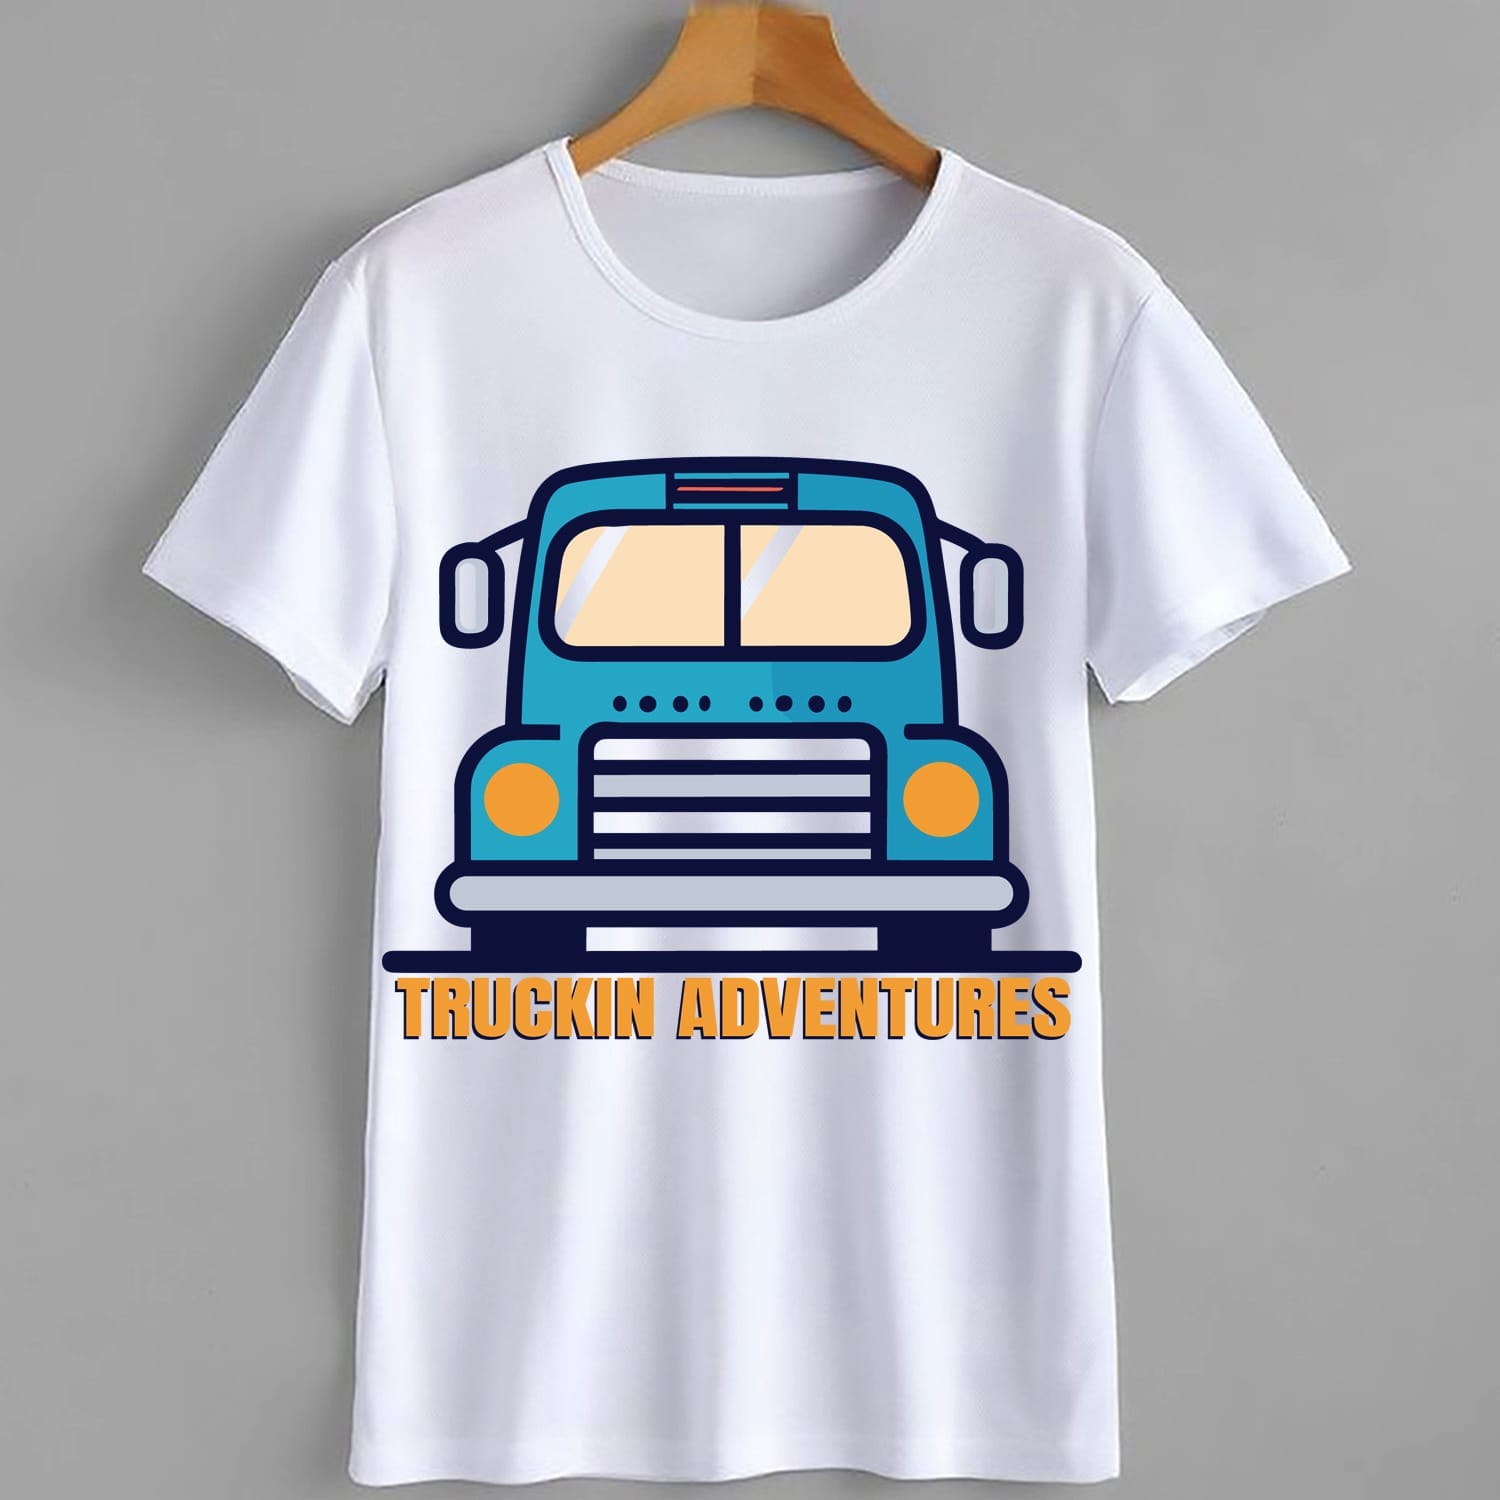 "Embark on Truckin' Adventures with our captivating t-shirt design. Go grab your adventure gear now and hit the road in style!"